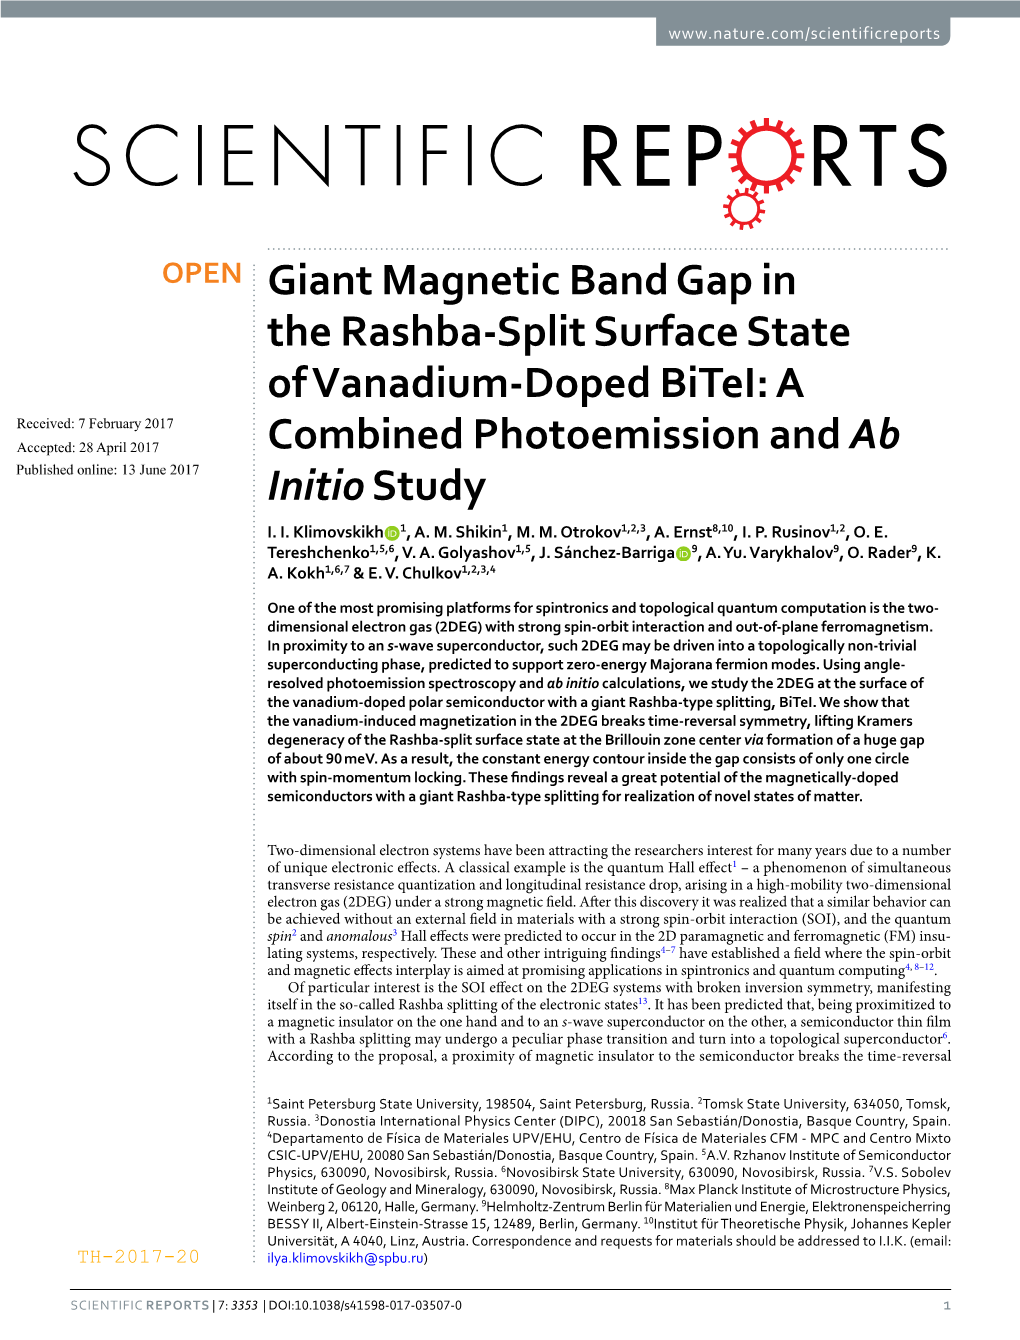 Giant Magnetic Band Gap in the Rashba-Split Surface State Of